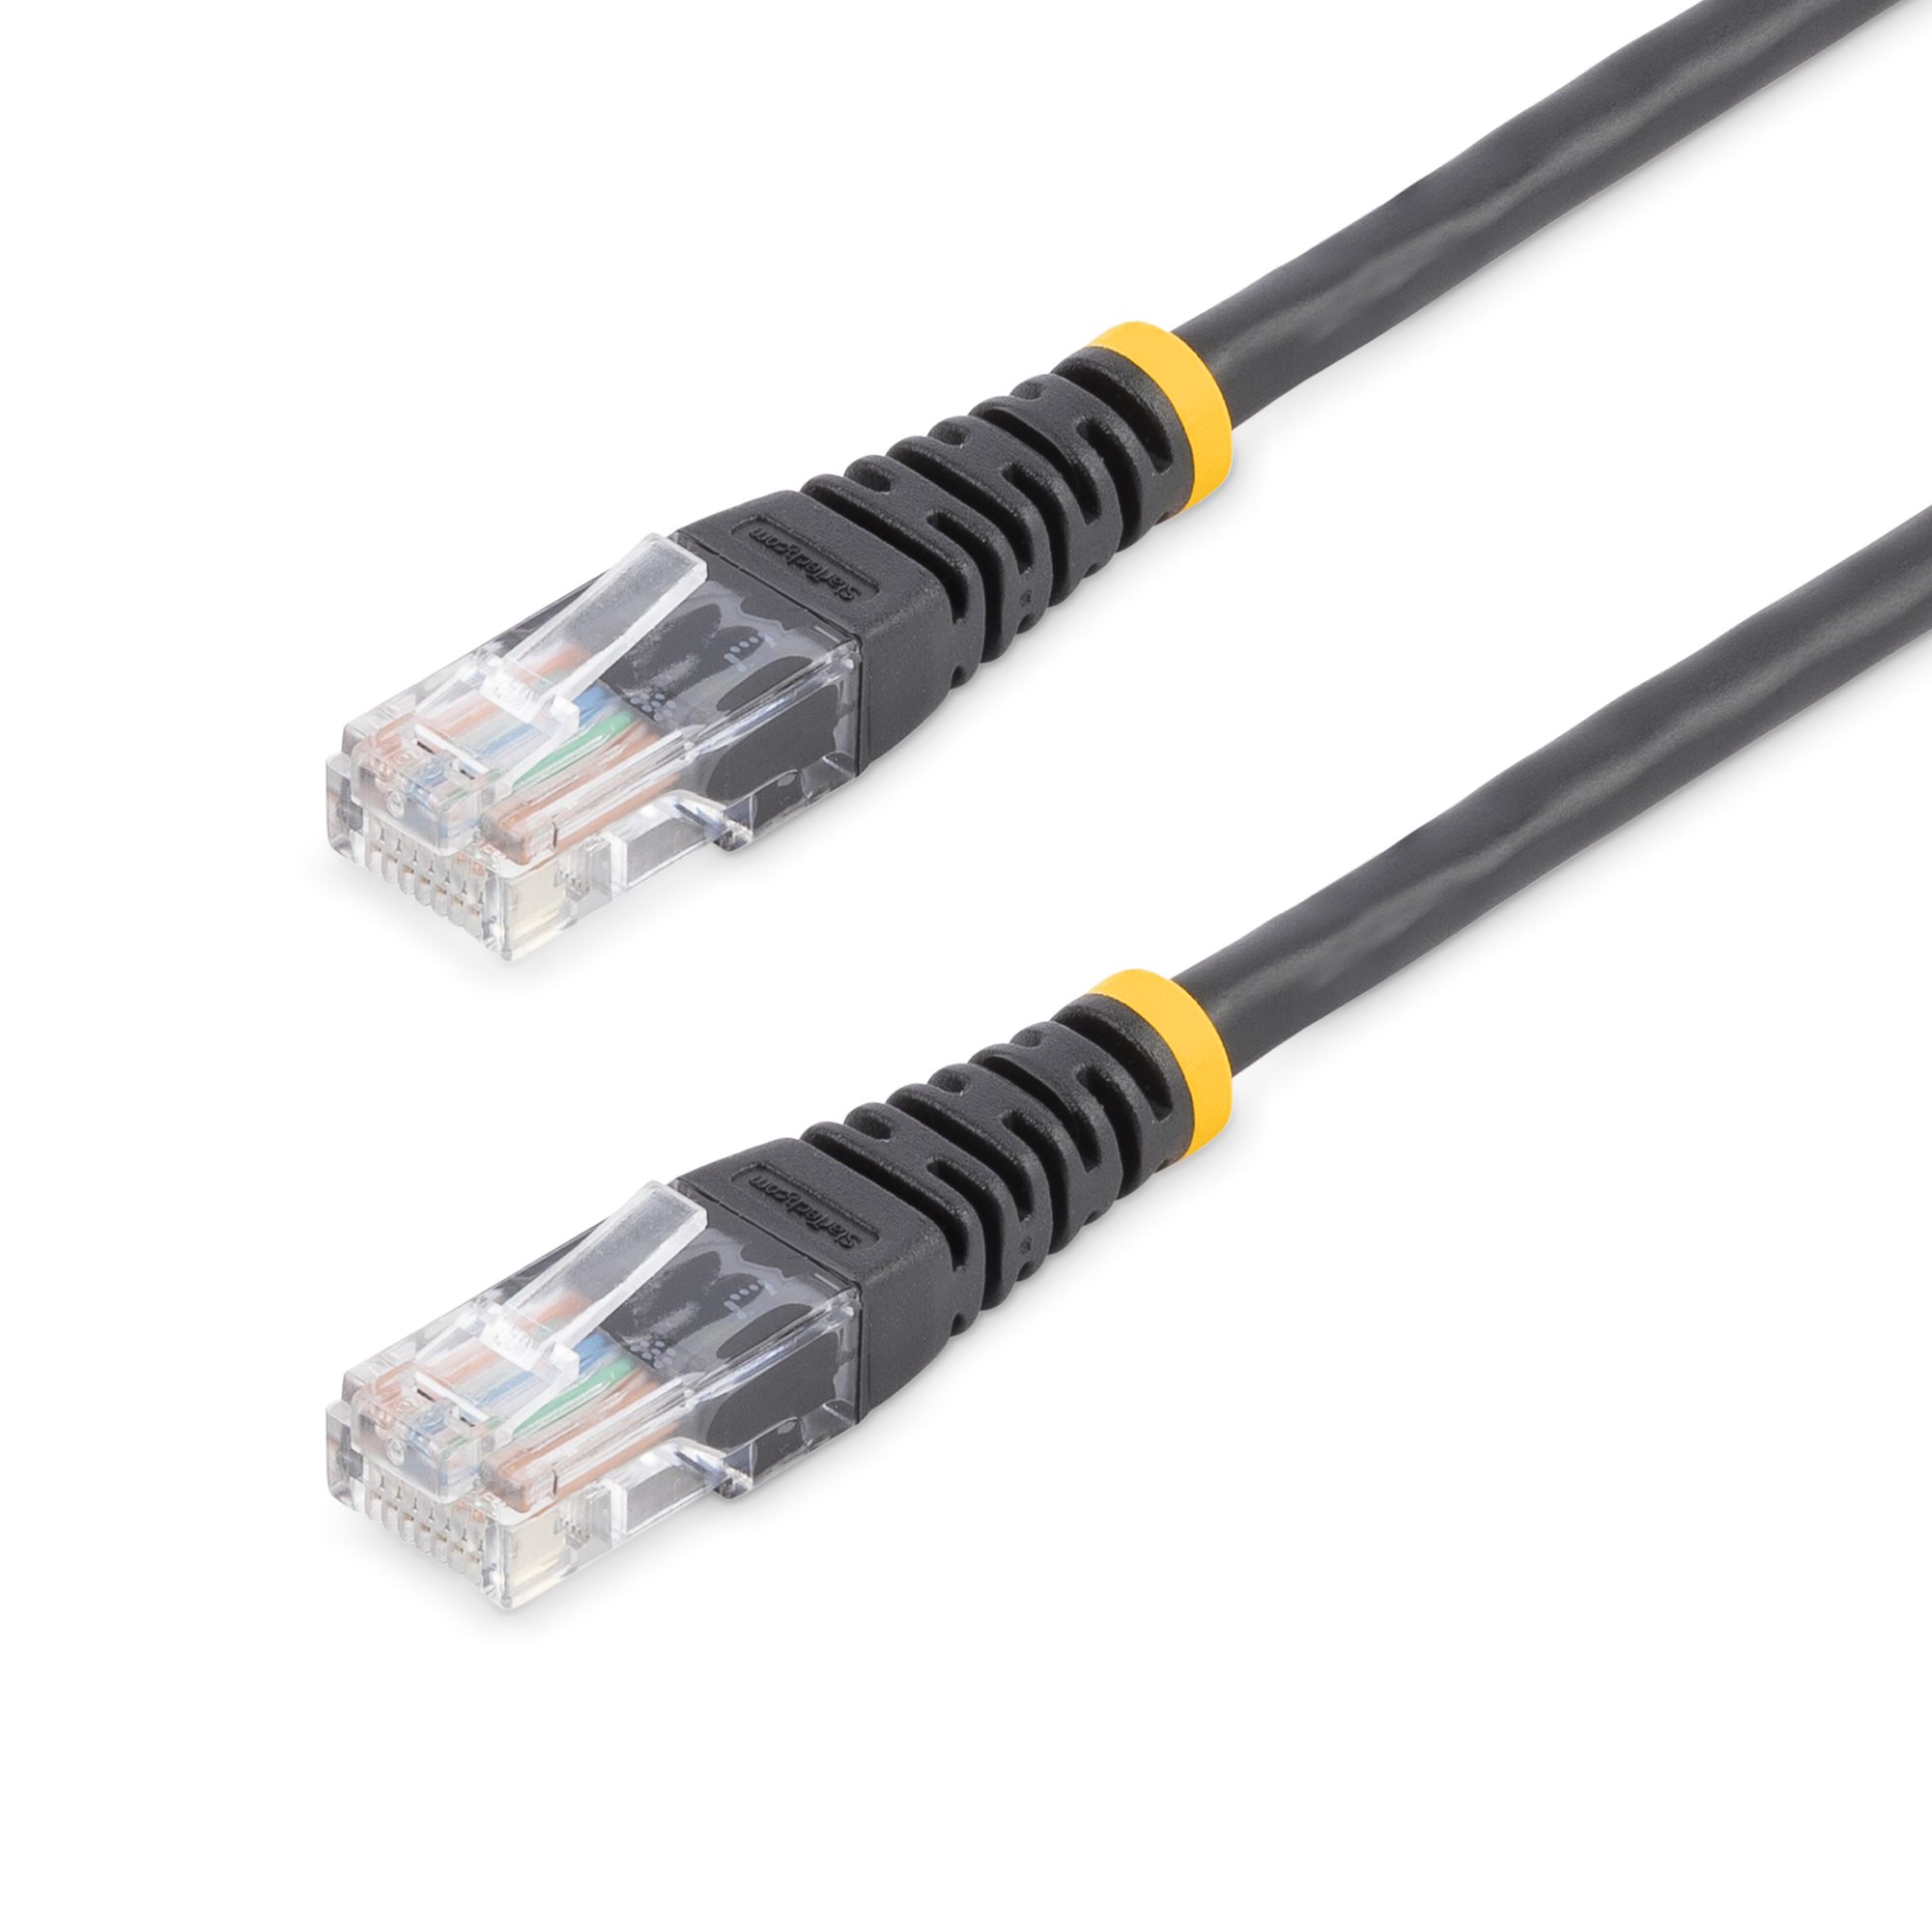 15.2 Meters Basics RJ45 Cat-5e Network Ethernet Cable 50 Feet 5-Pack 